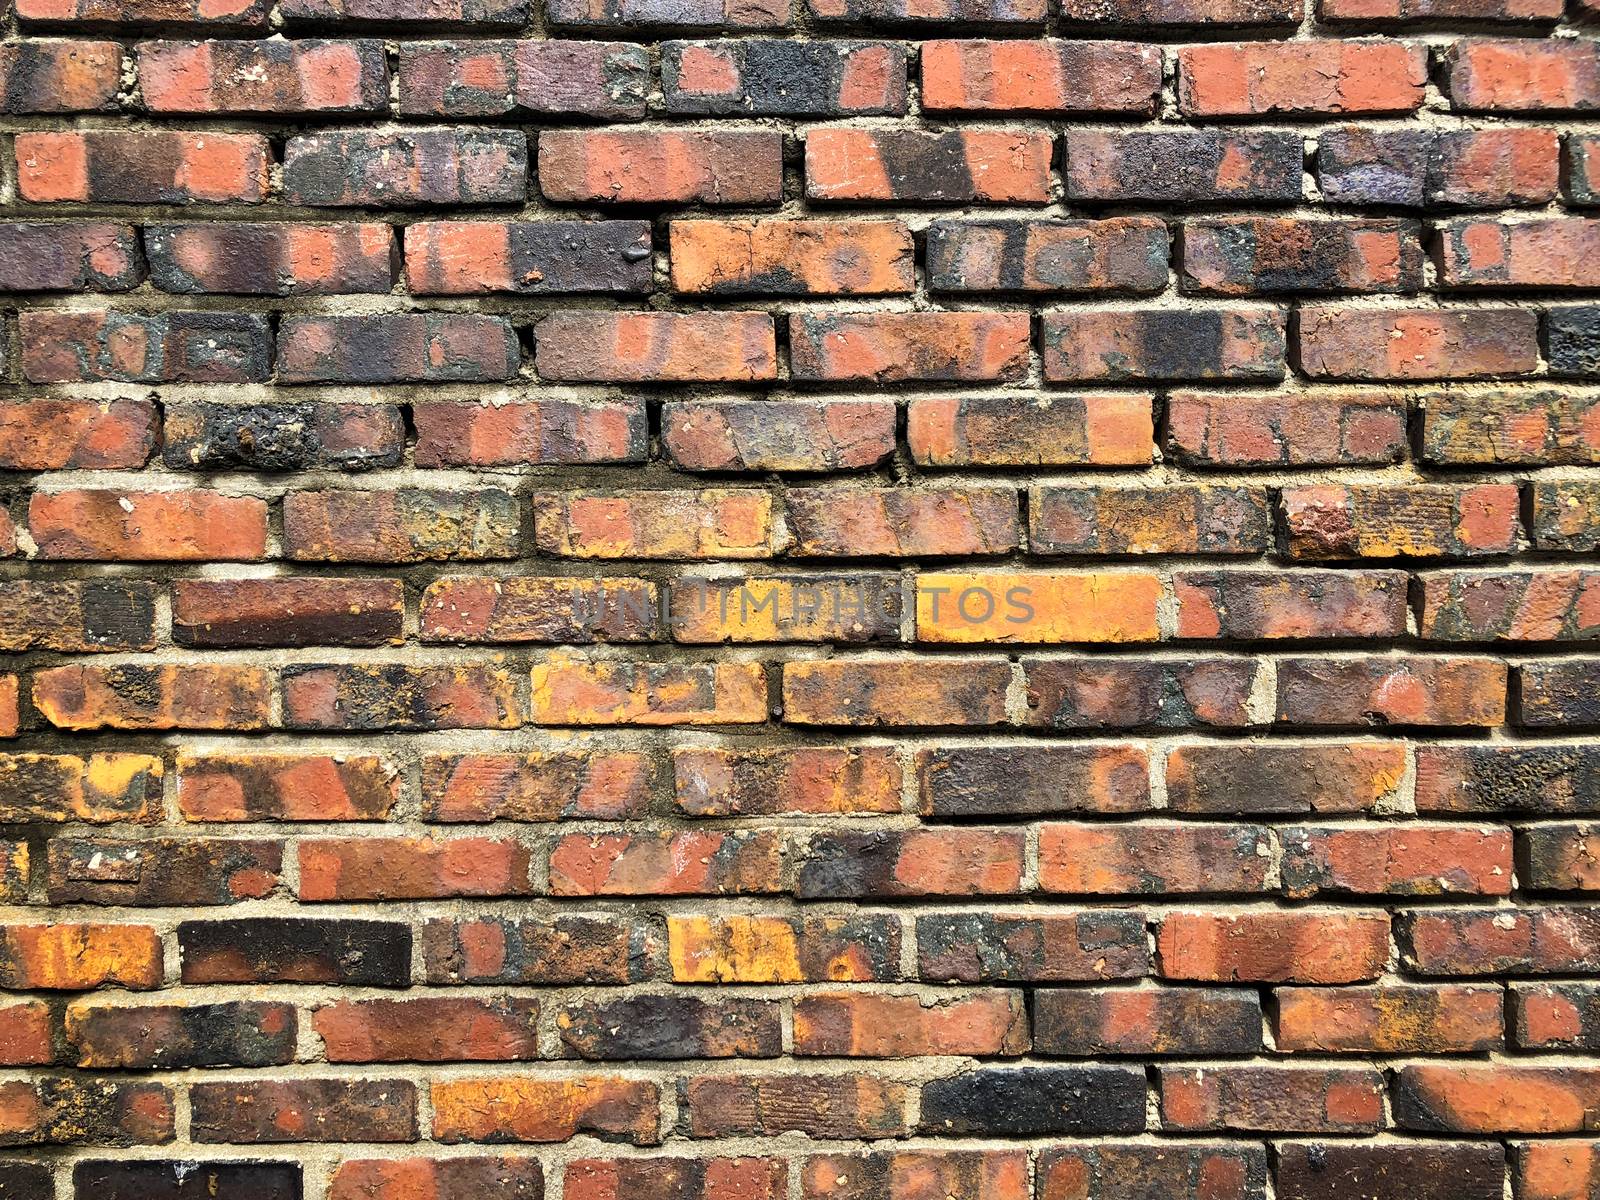 Brick wall background detail and close up